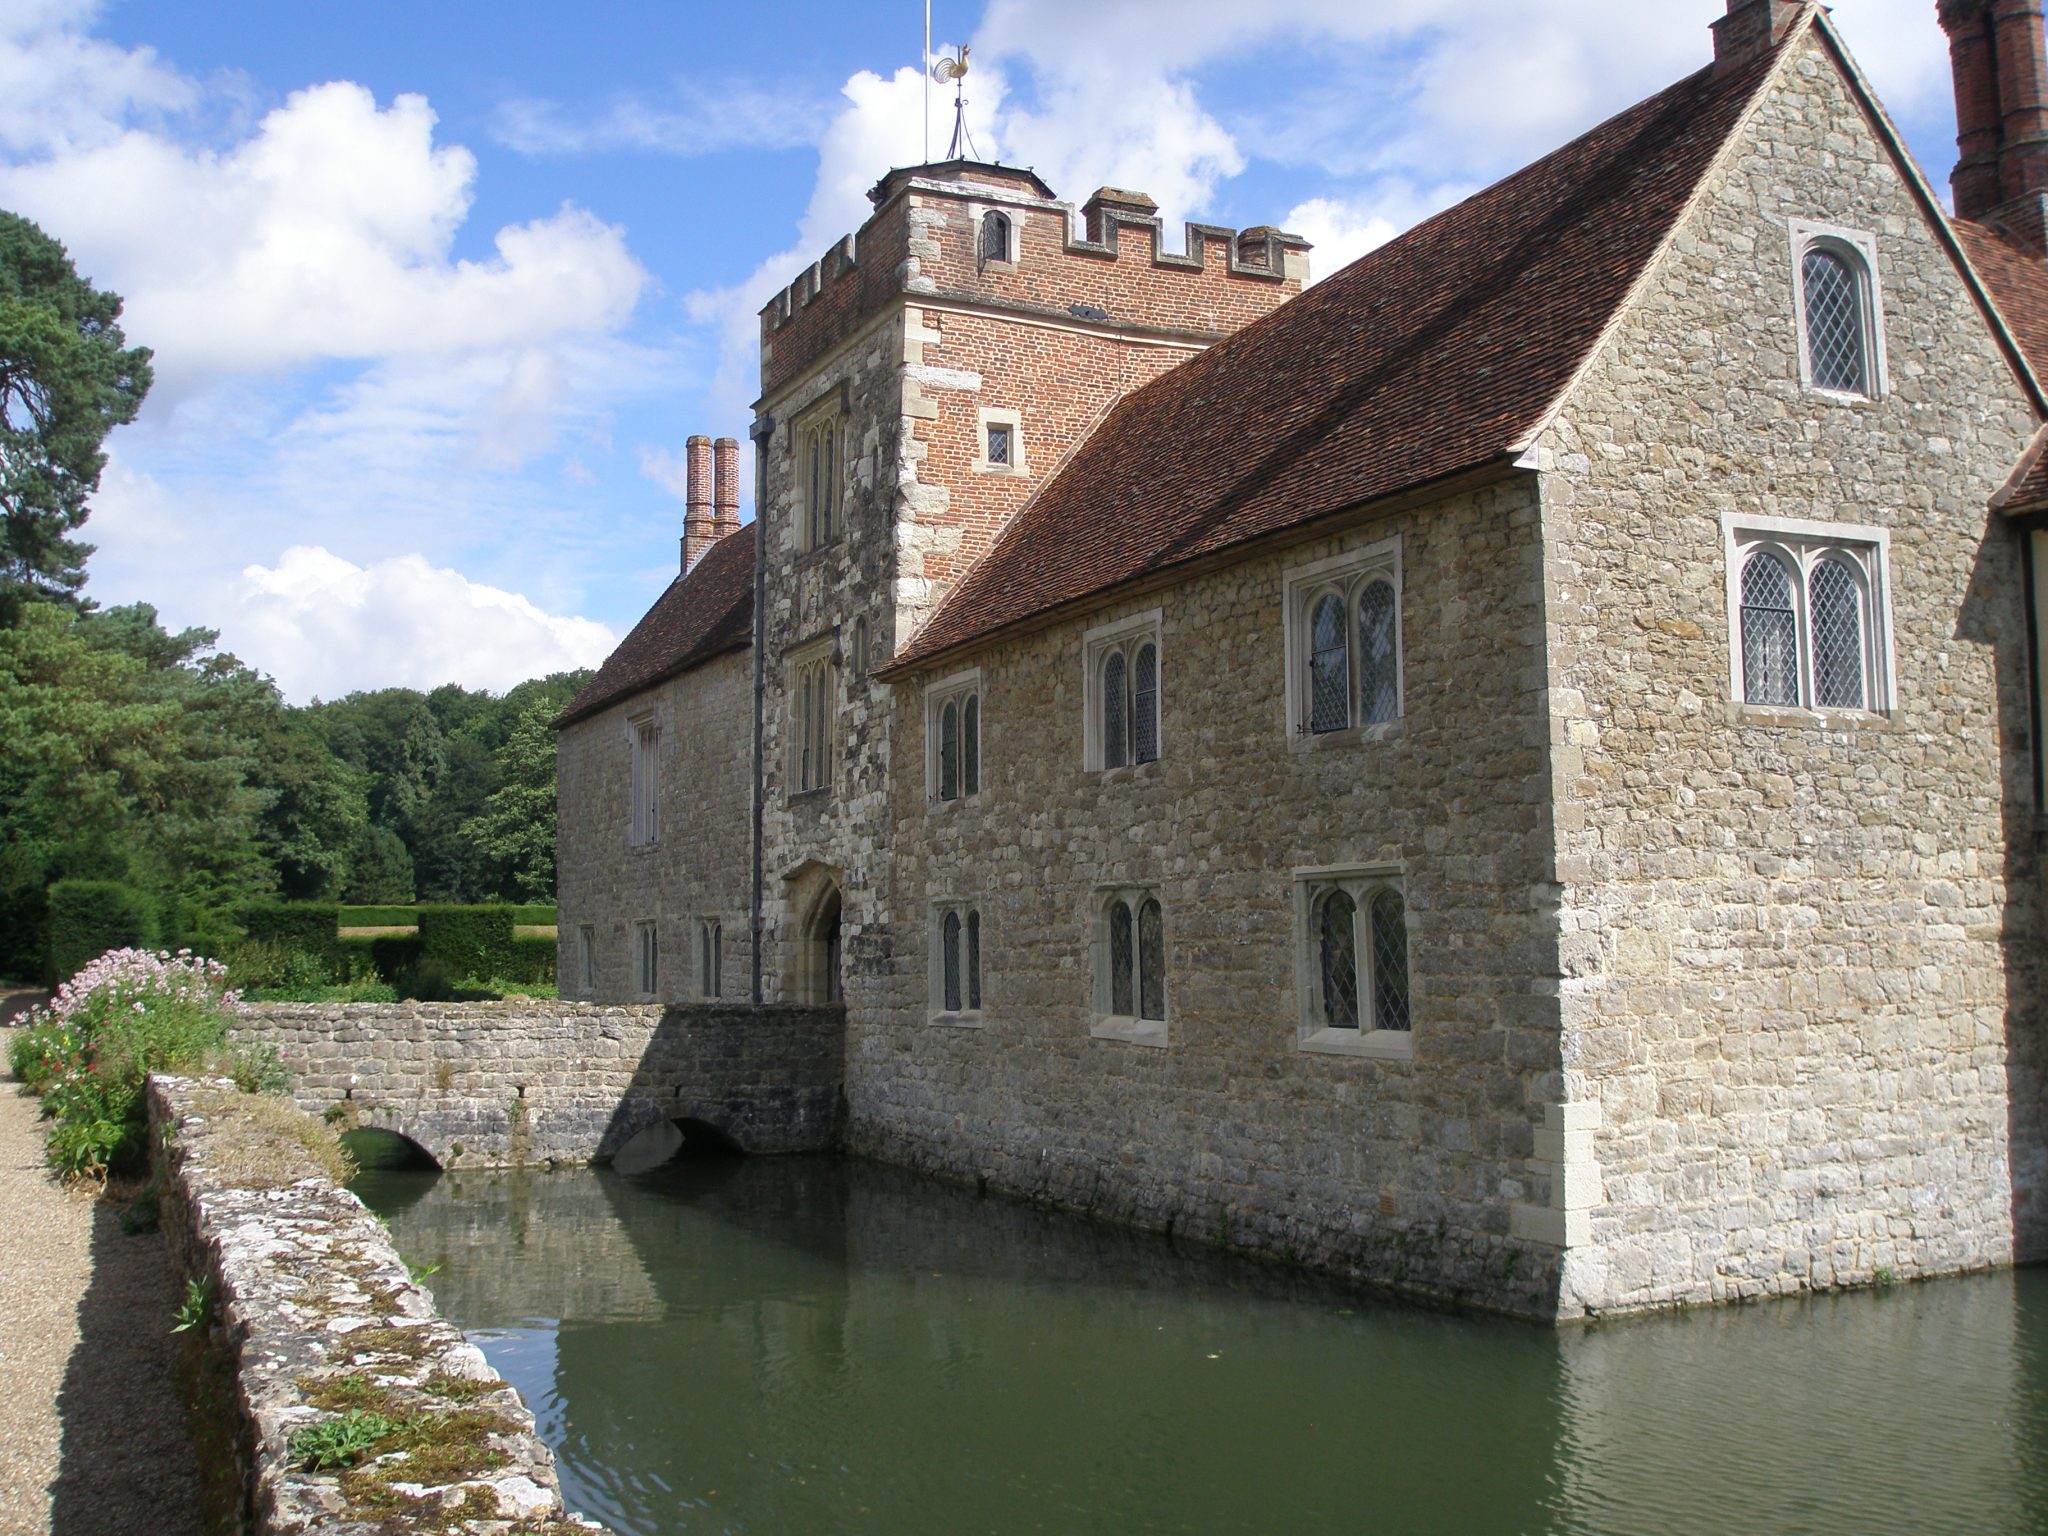 The Gatehouse Tower and West Front